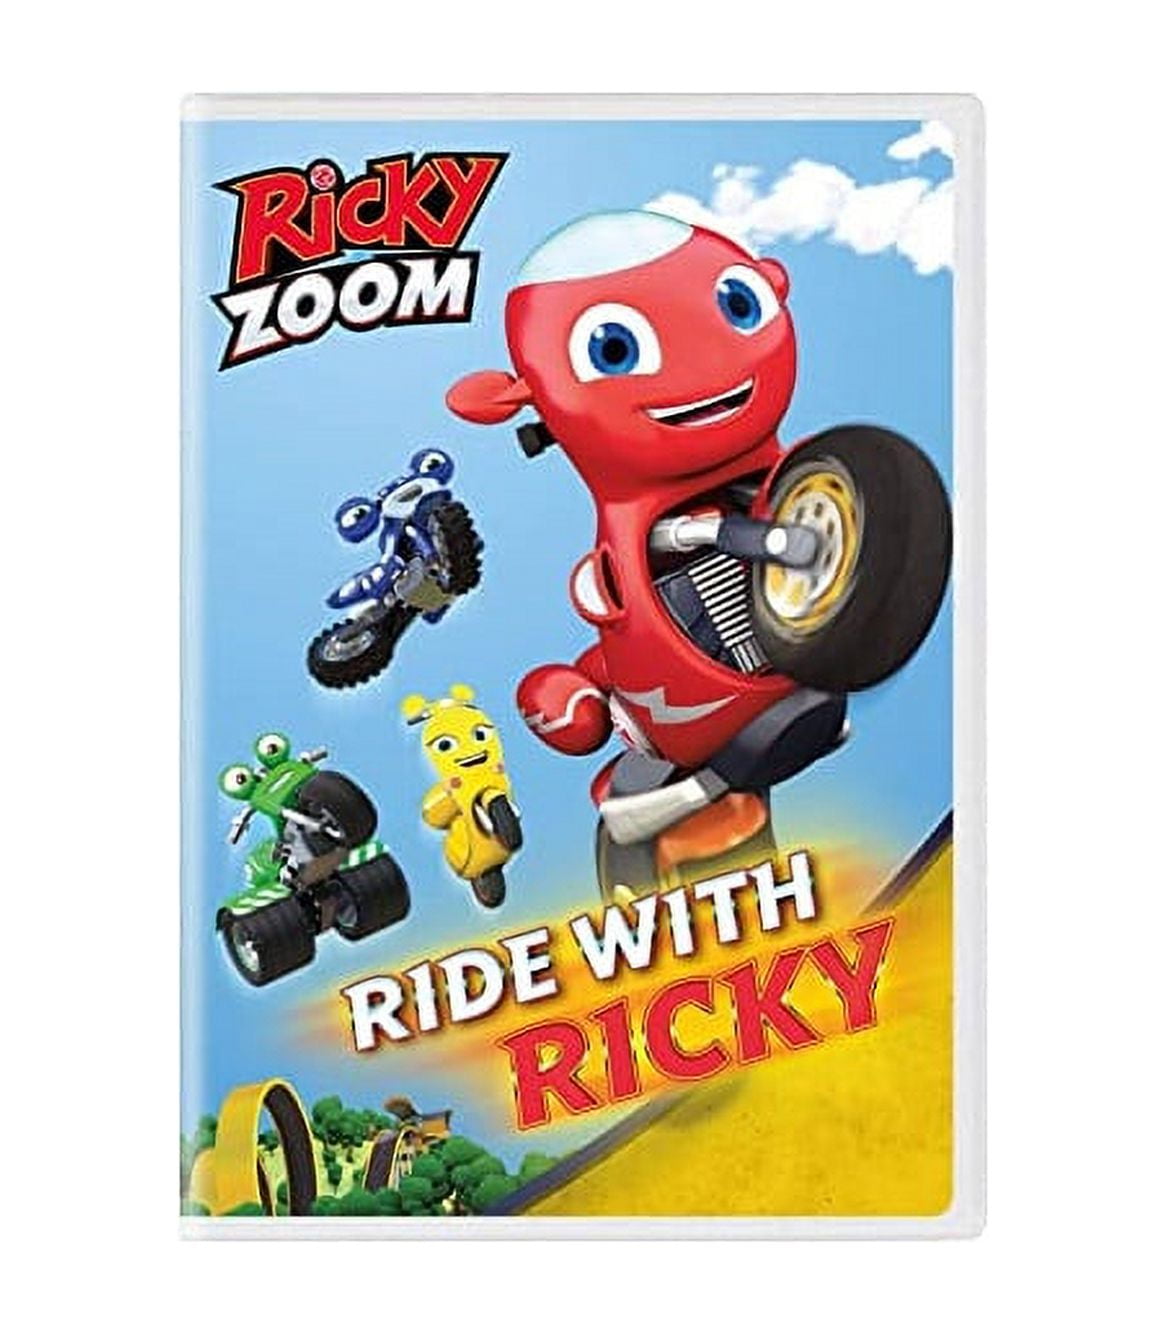 Ricky Zoom TV Review